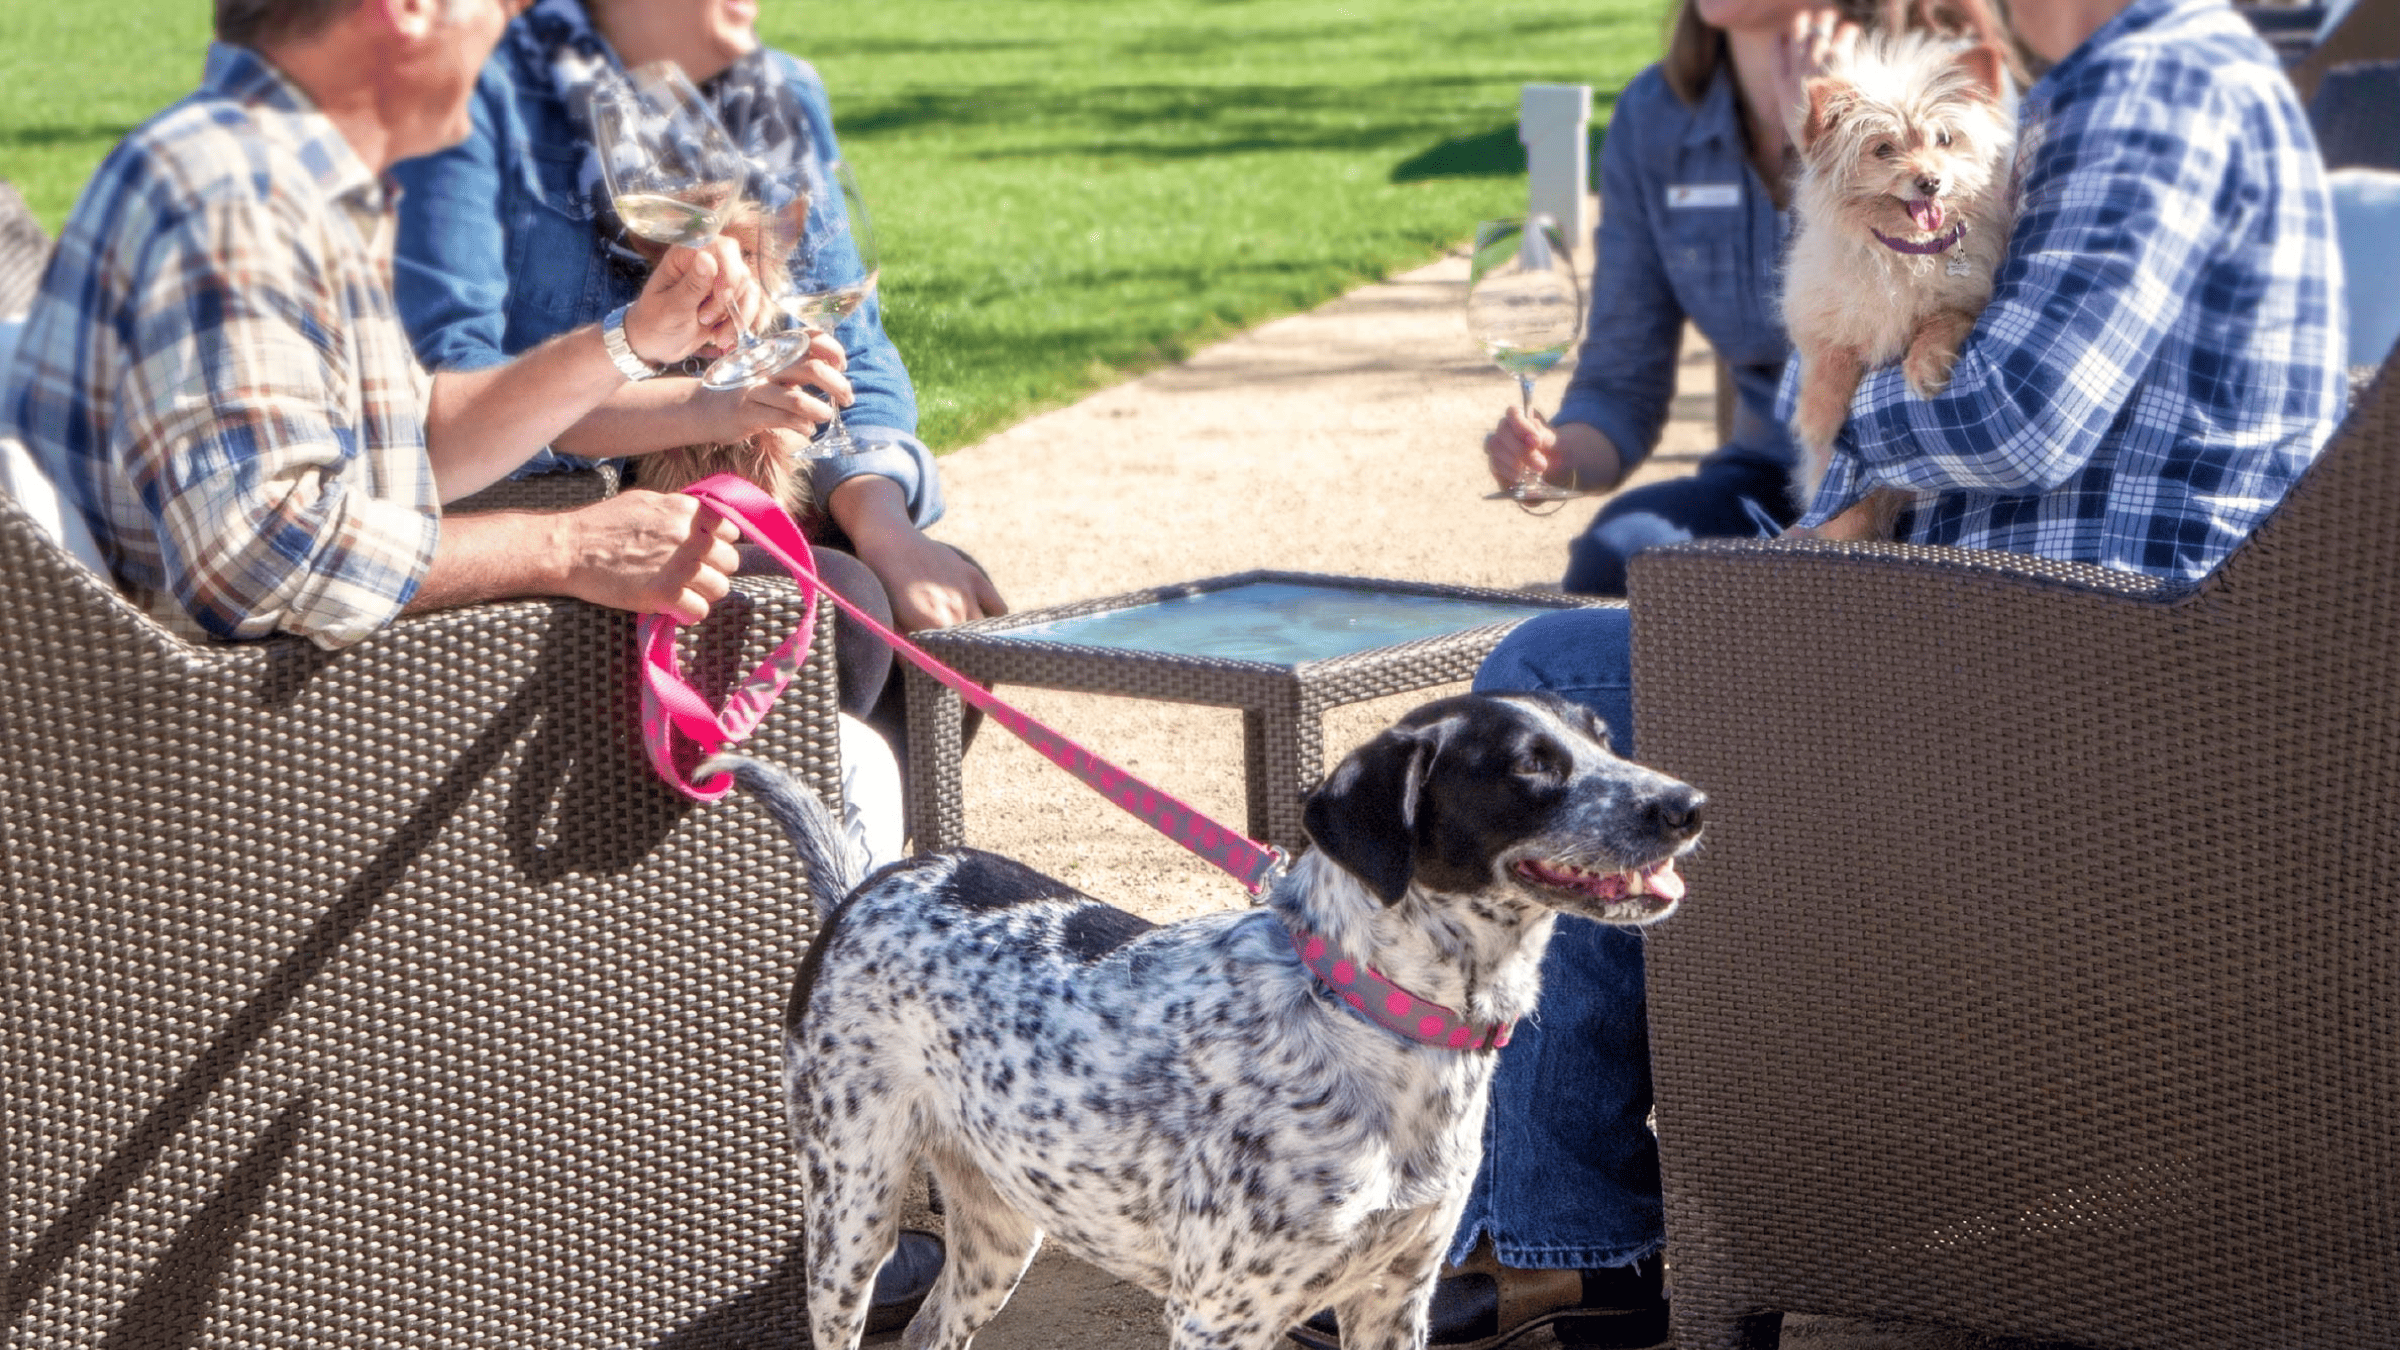 A group of people and a dog enjoying wine on a patio in Napa. - Dogtrekker